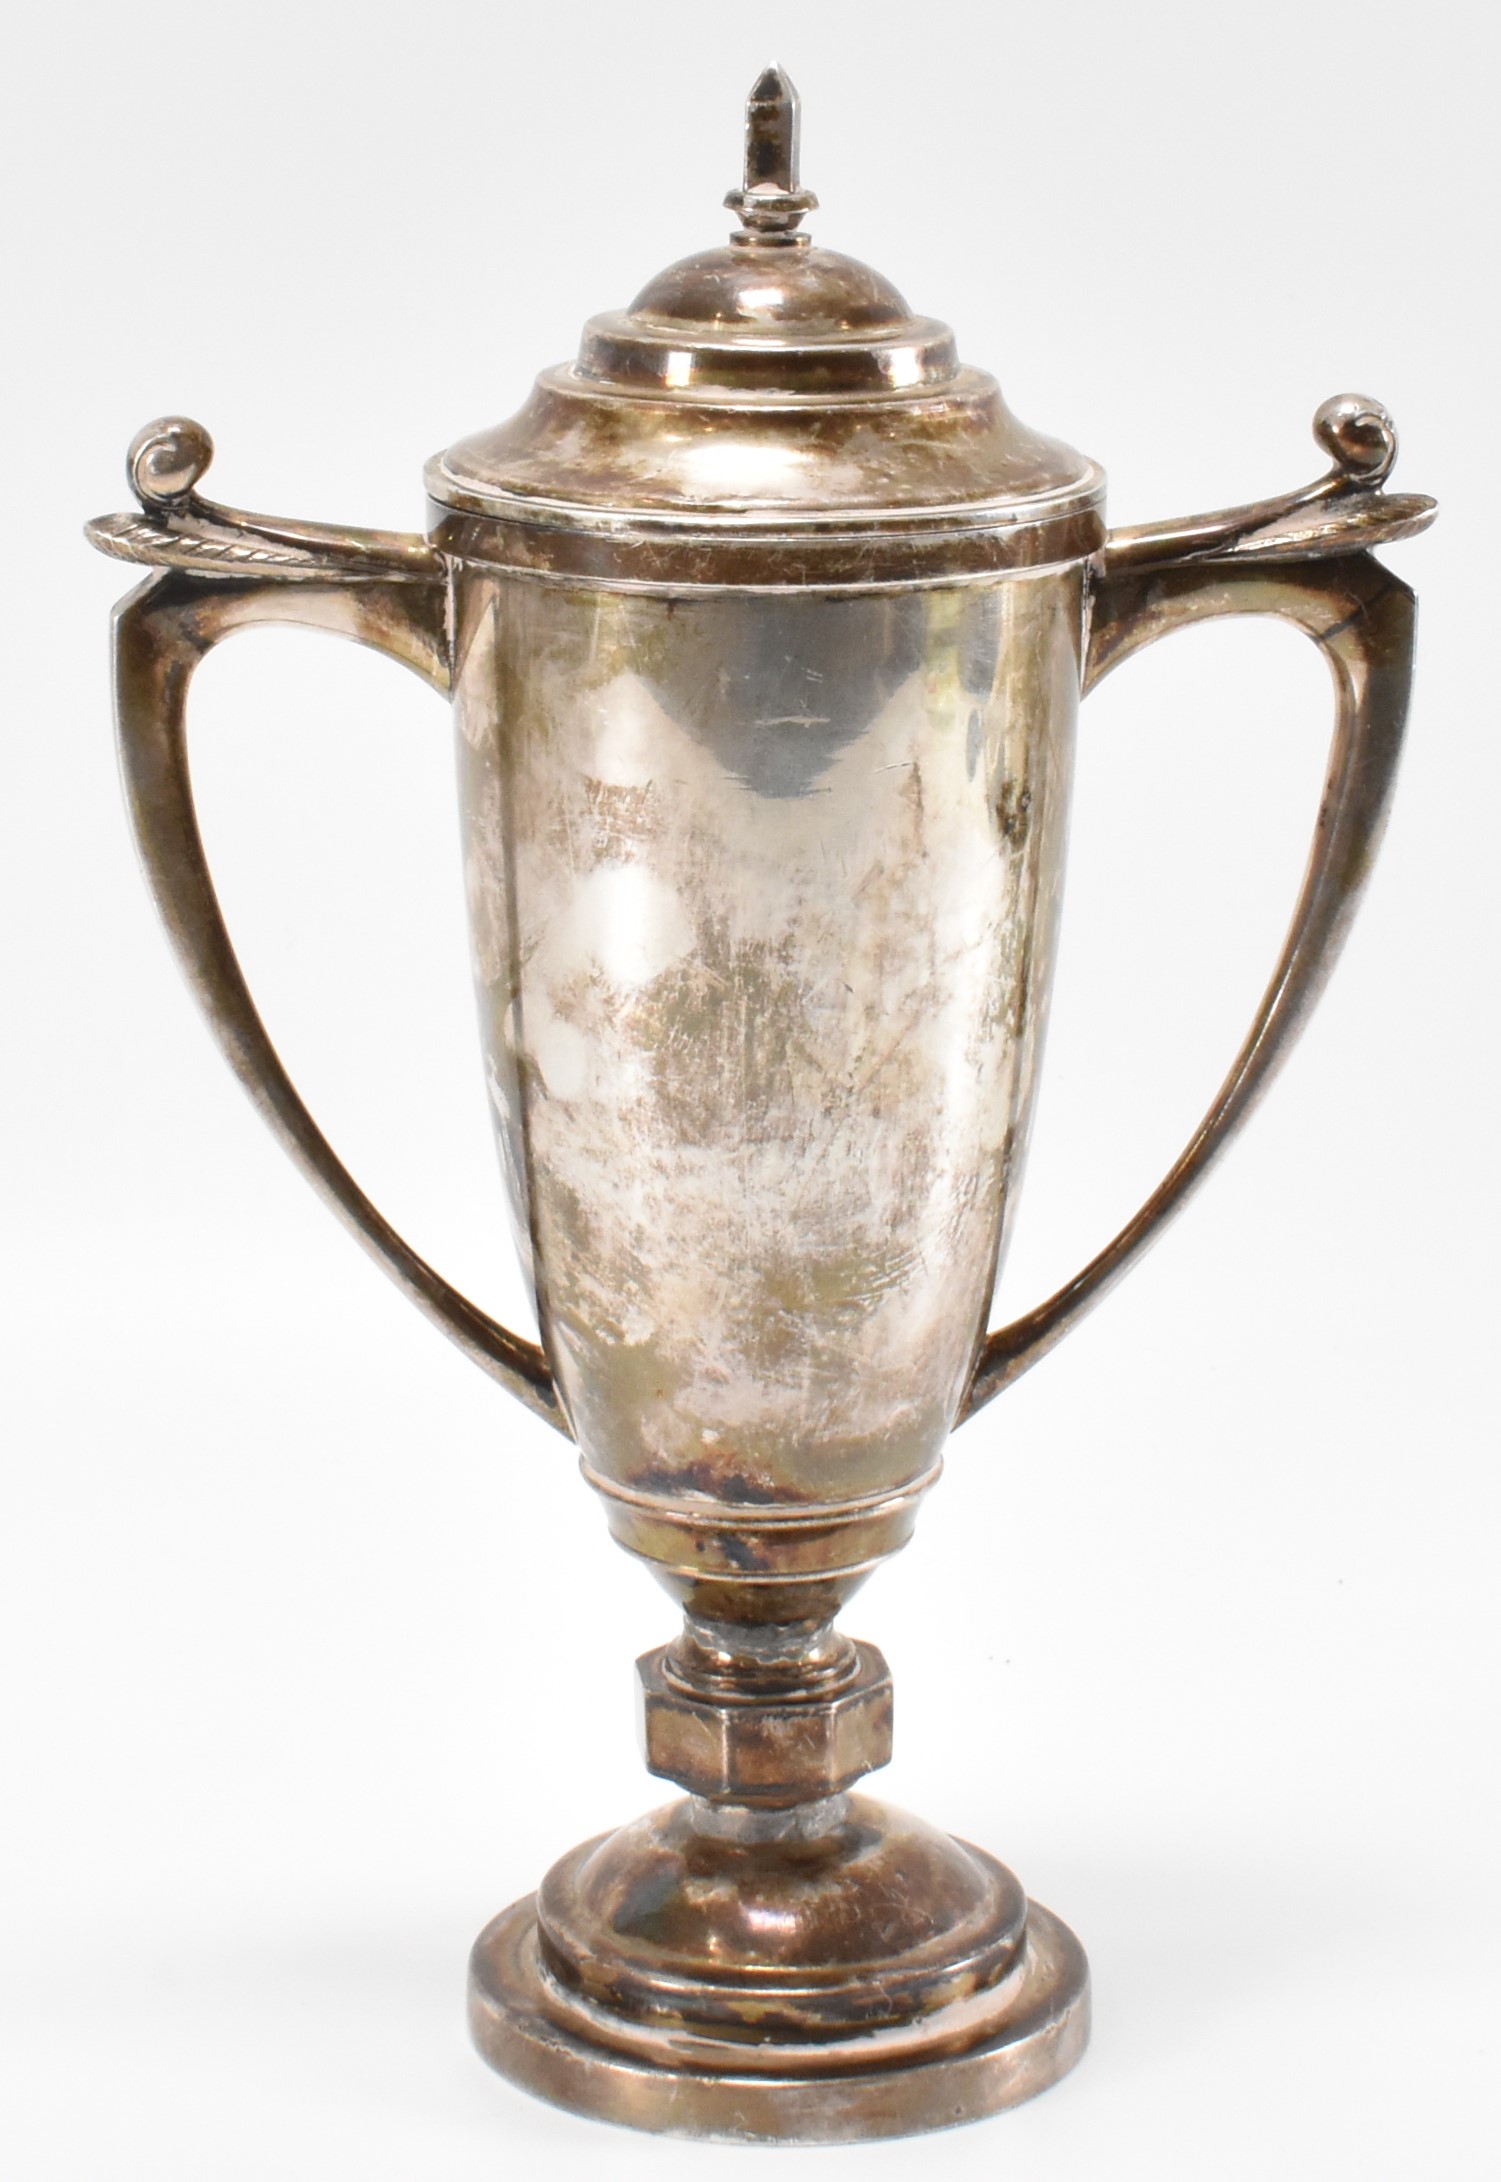 1930'S ART DECO SILVER TROPHY - Image 4 of 6